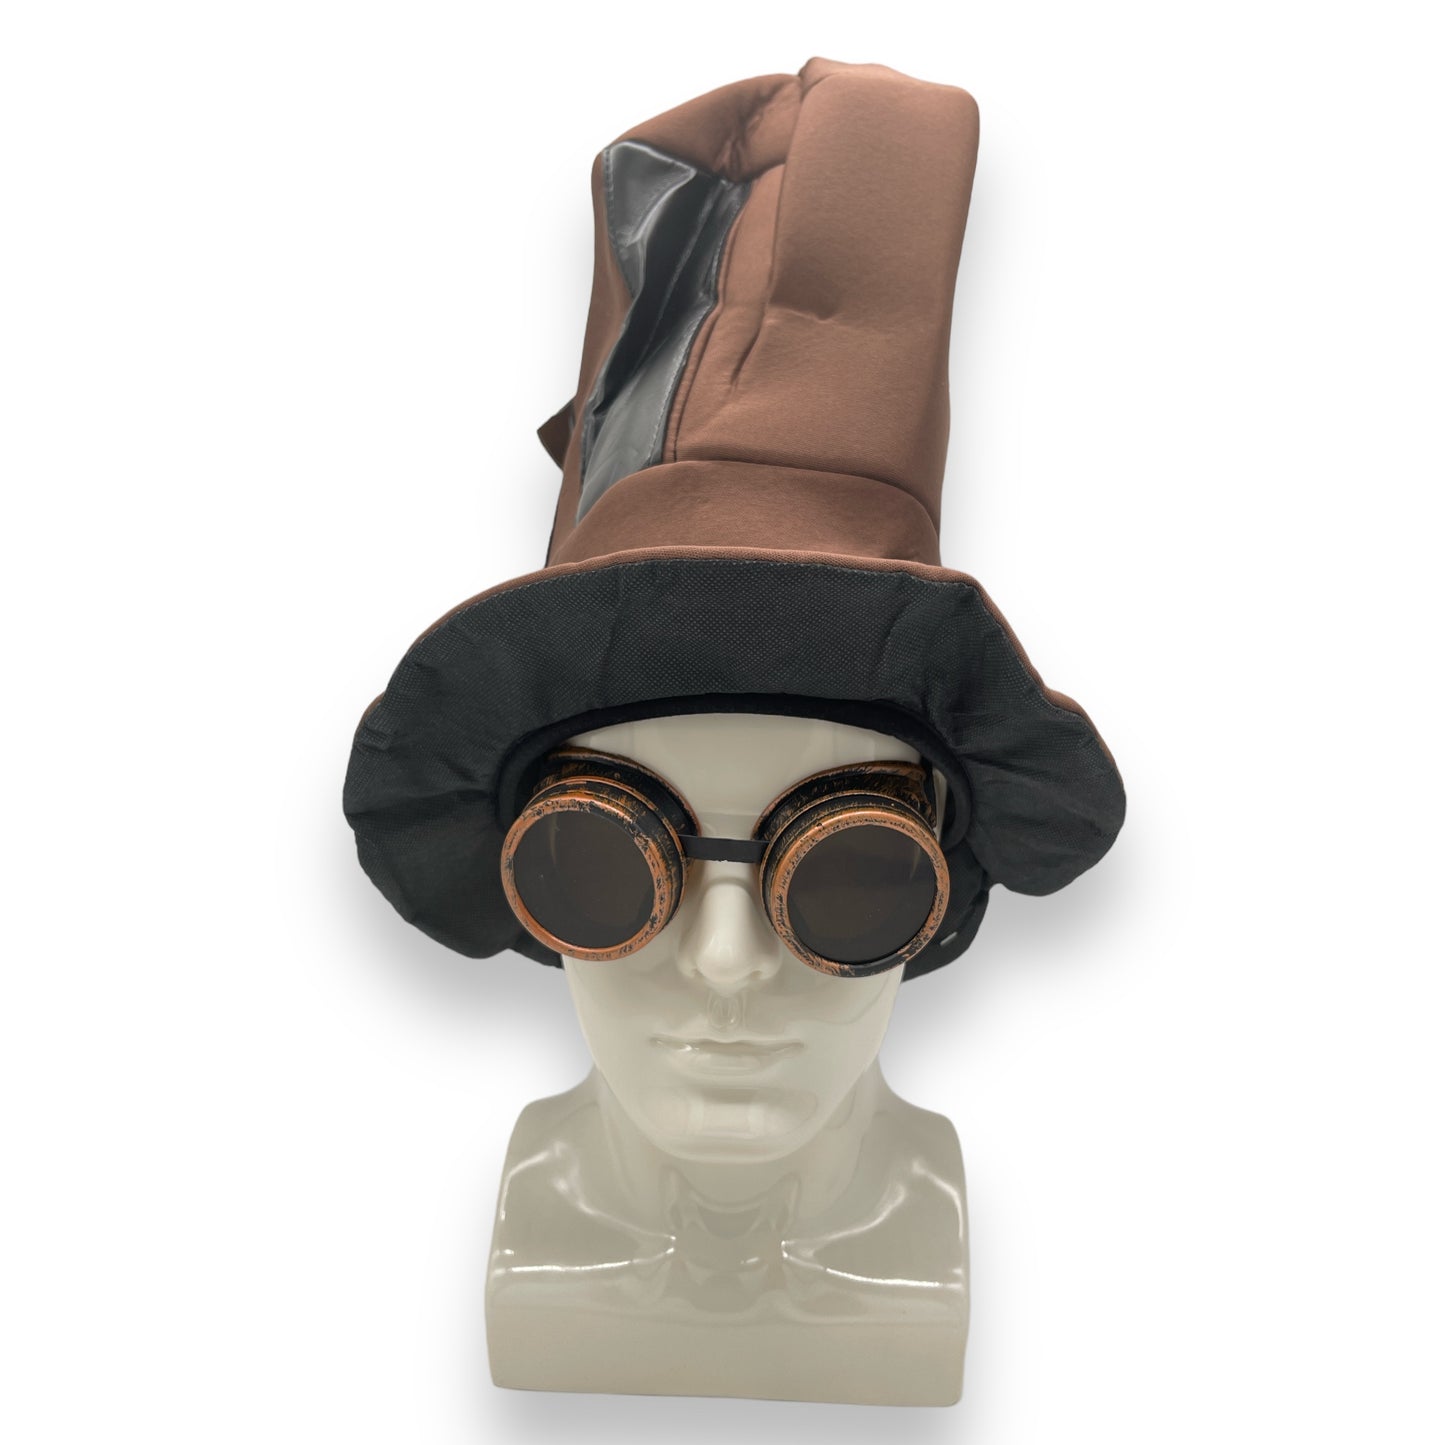 Steampunk Top Hat with Goggles - Vintage Brown Look for Festivals &amp; Theme Parties!